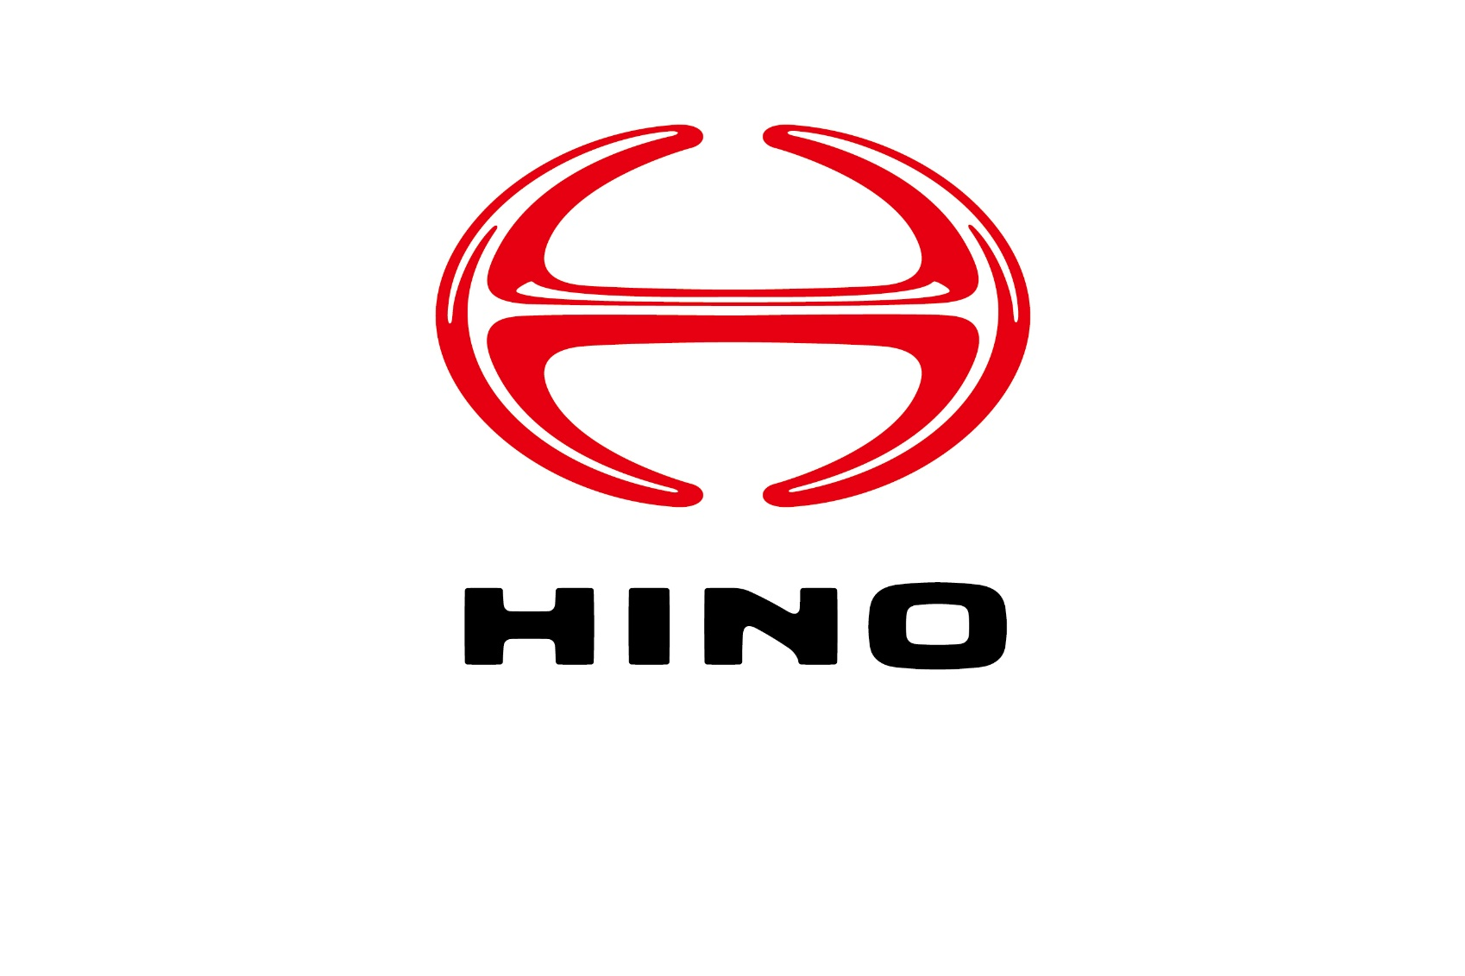 Hino Launches the "Trust Restoration Project"